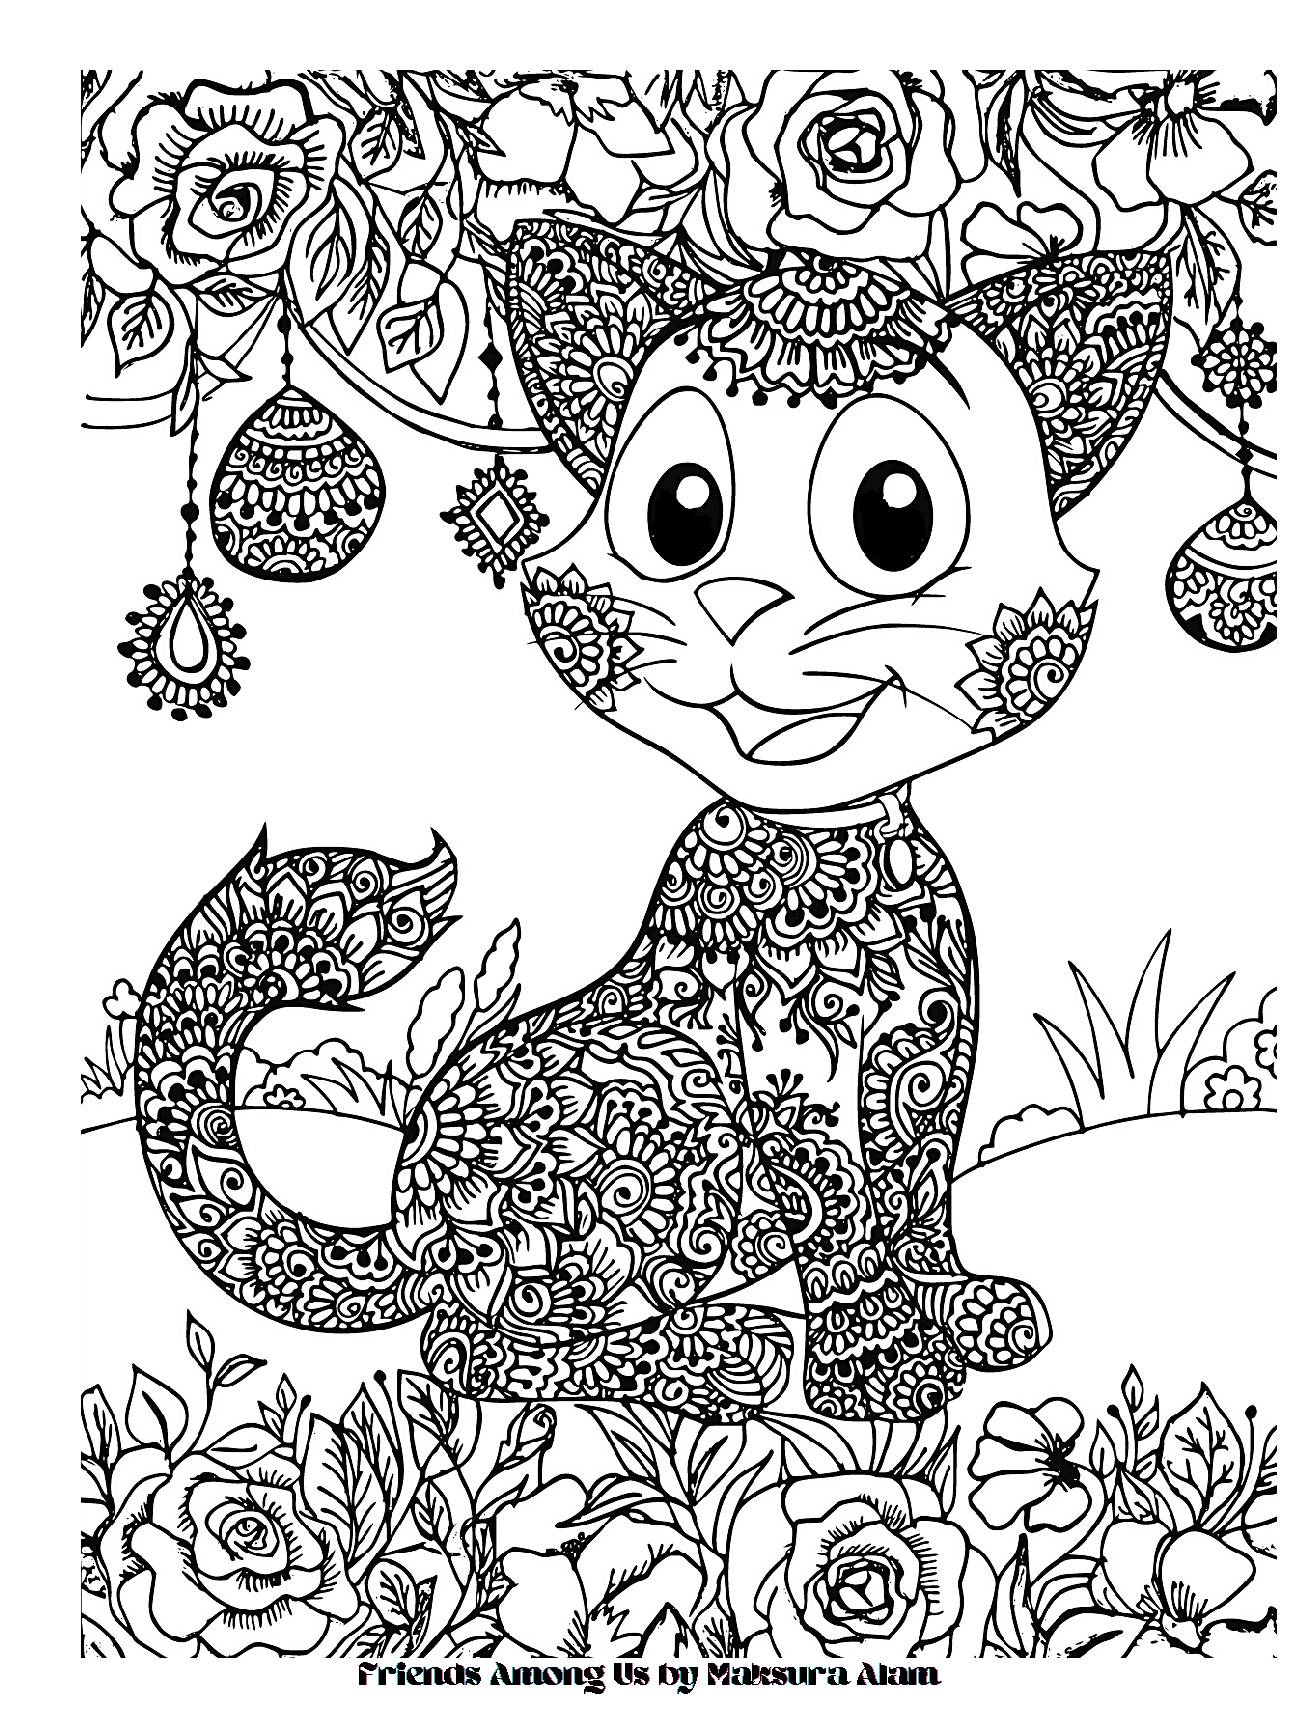 Friends Among Us: Cat Coloring Page